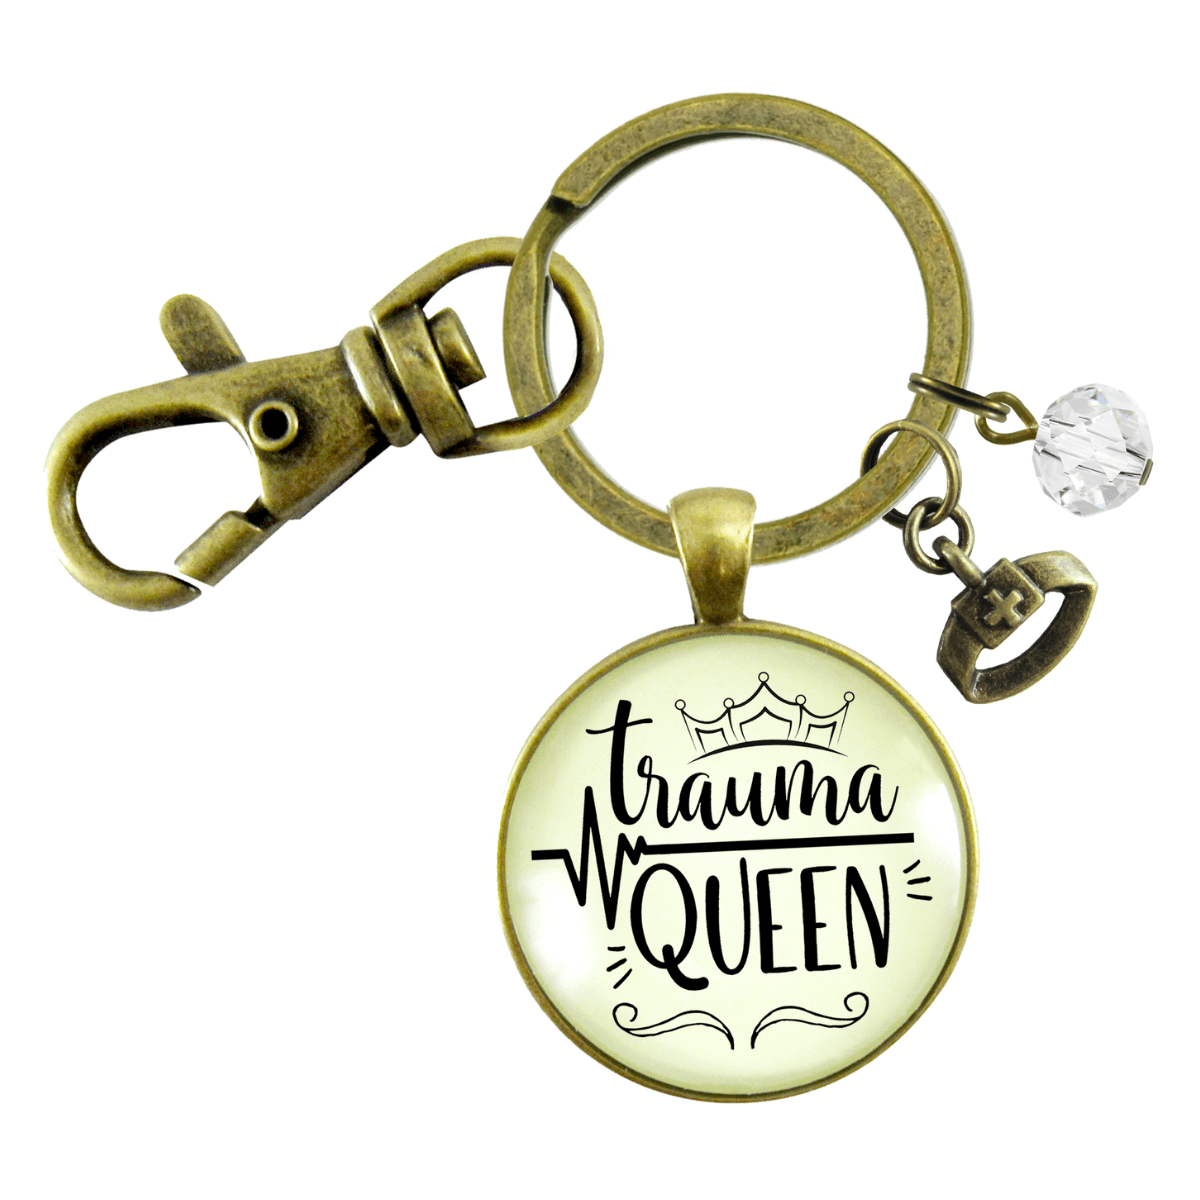 Trauma Queen Keychain Nurse Medical Assistant Funny Quote Jewelry - Gutsy Goodness